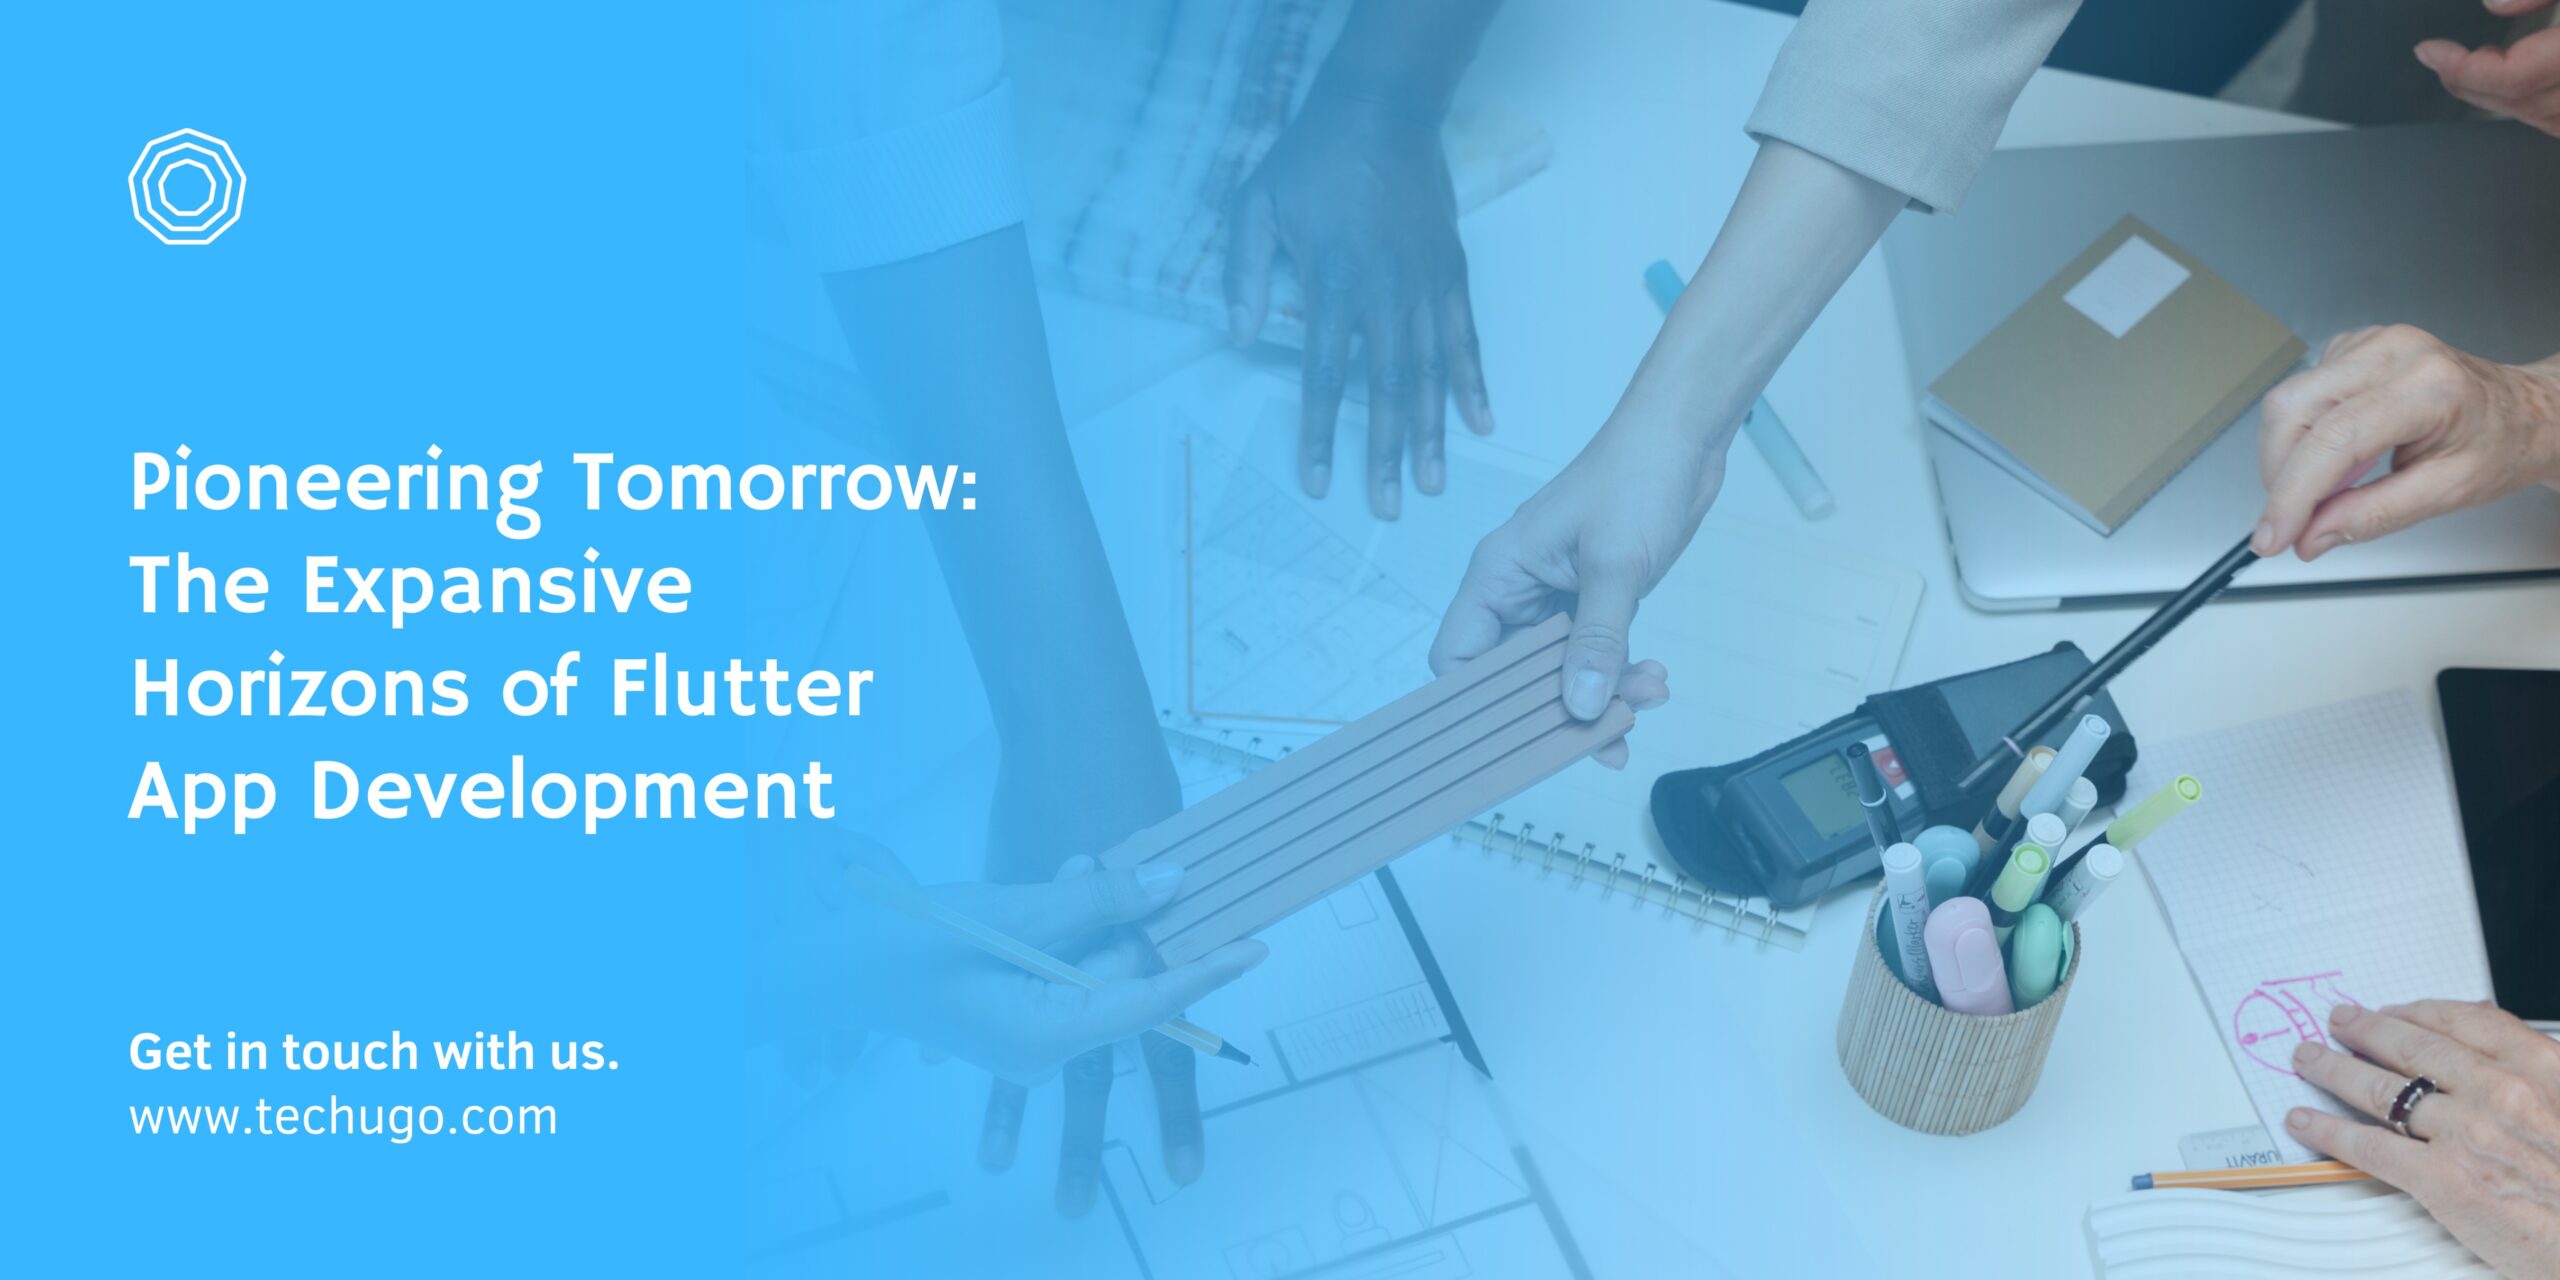 Pioneering Tomorrow: The Expansive Horizons of Flutter App Development